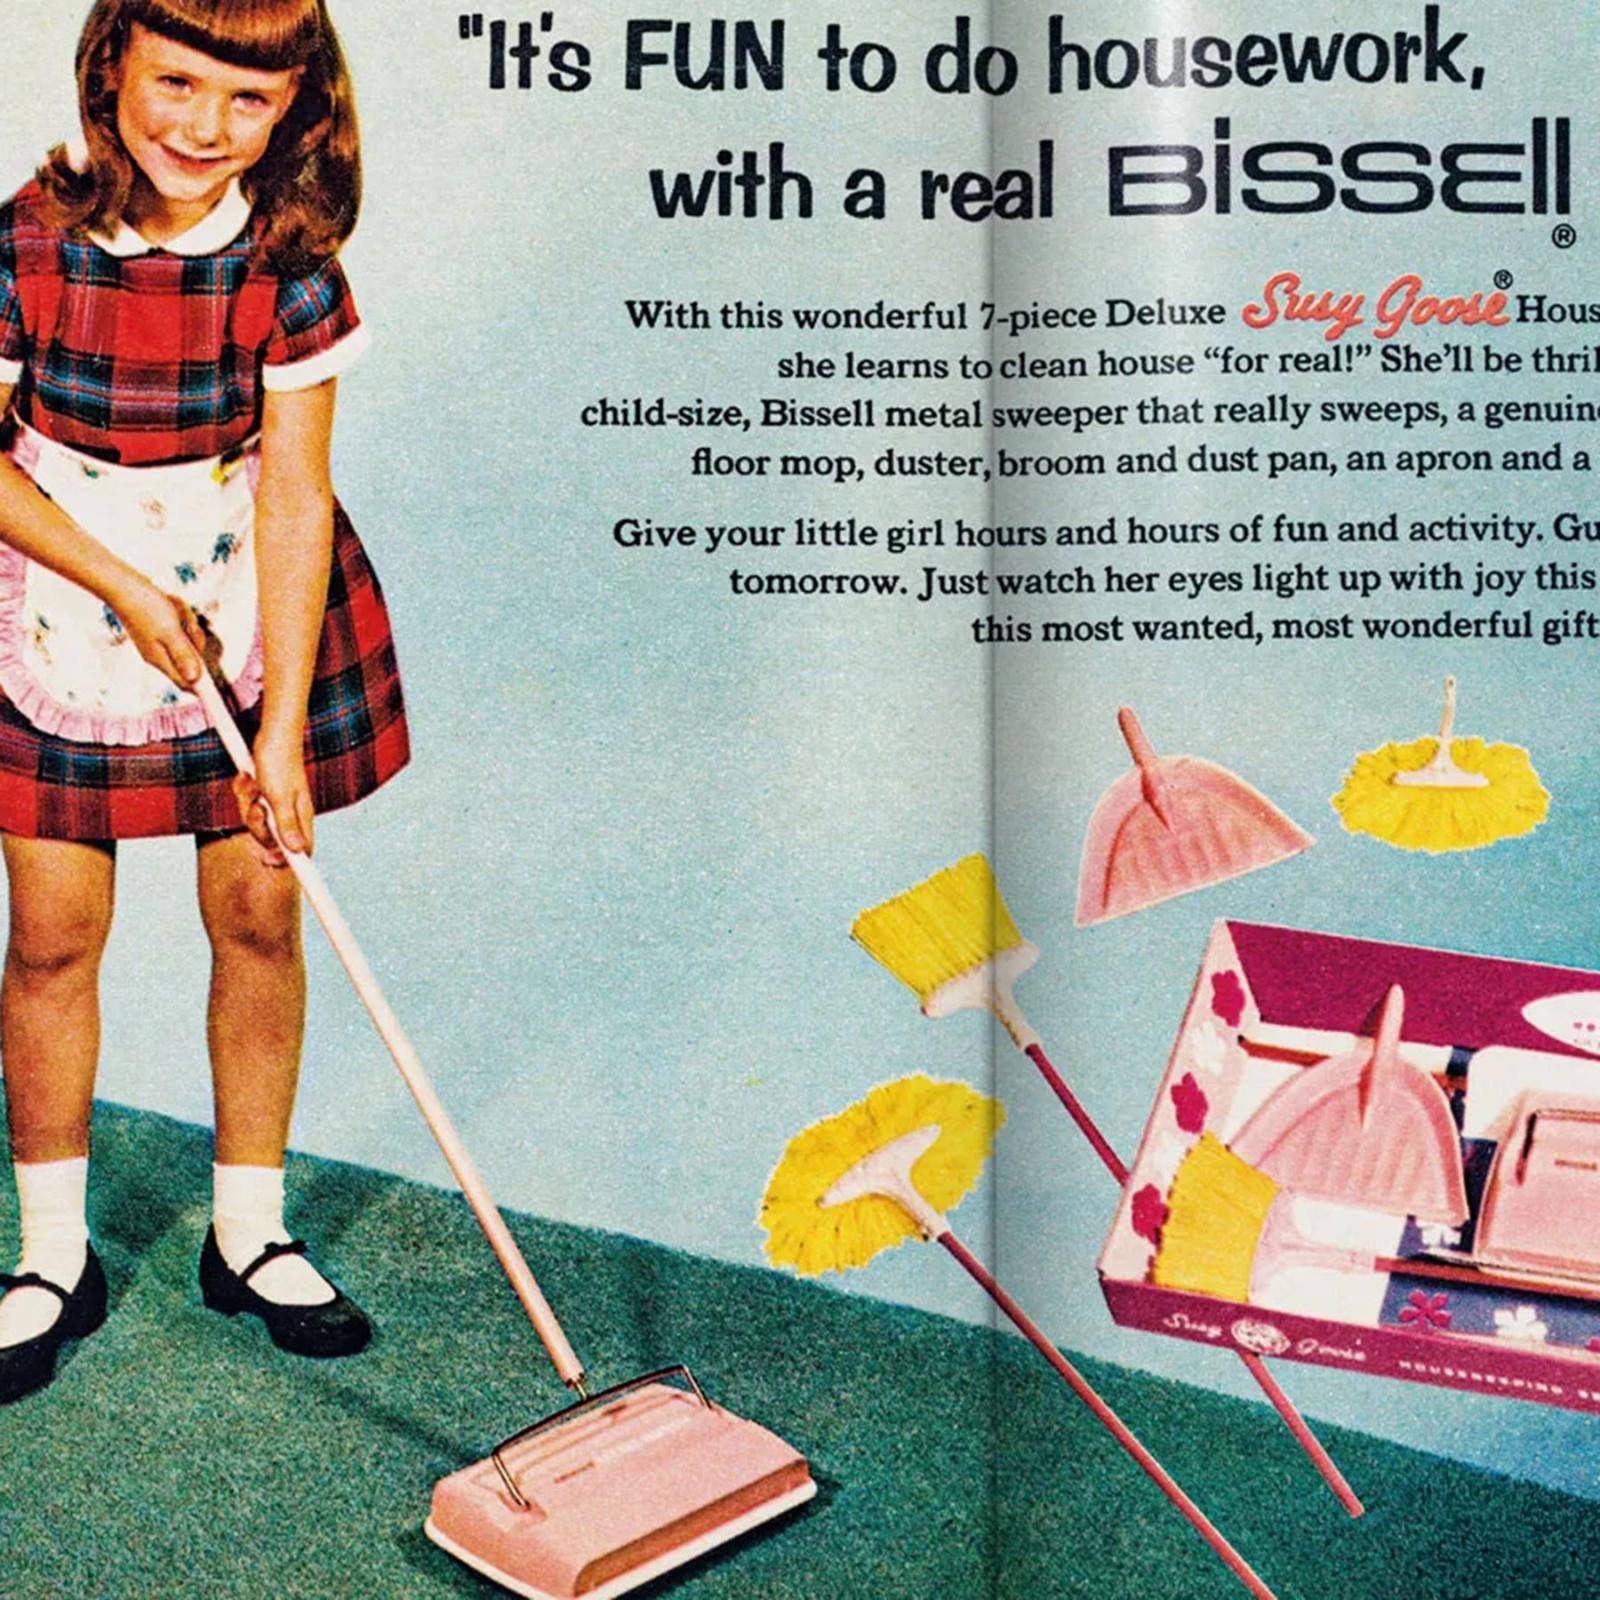 Vintage advertisement aimed to young girls about a Bissel metal sweeper. The ad was used in the Girl Museum Exhibit: Girls in Toyland created by Pace University Communication and Media Studies students.